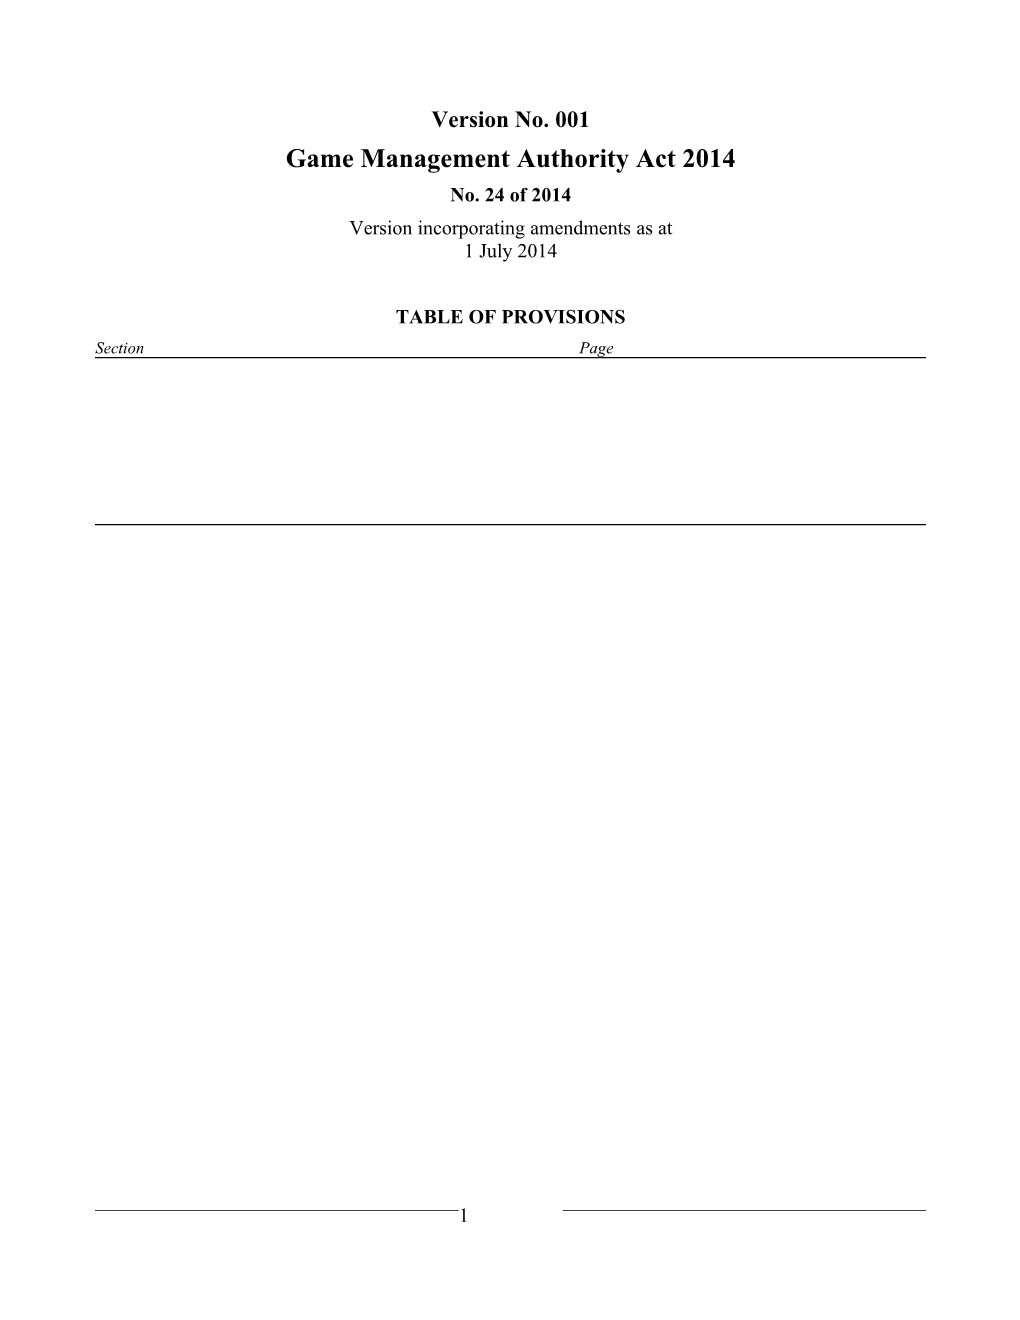 Game Management Authority Act 2014